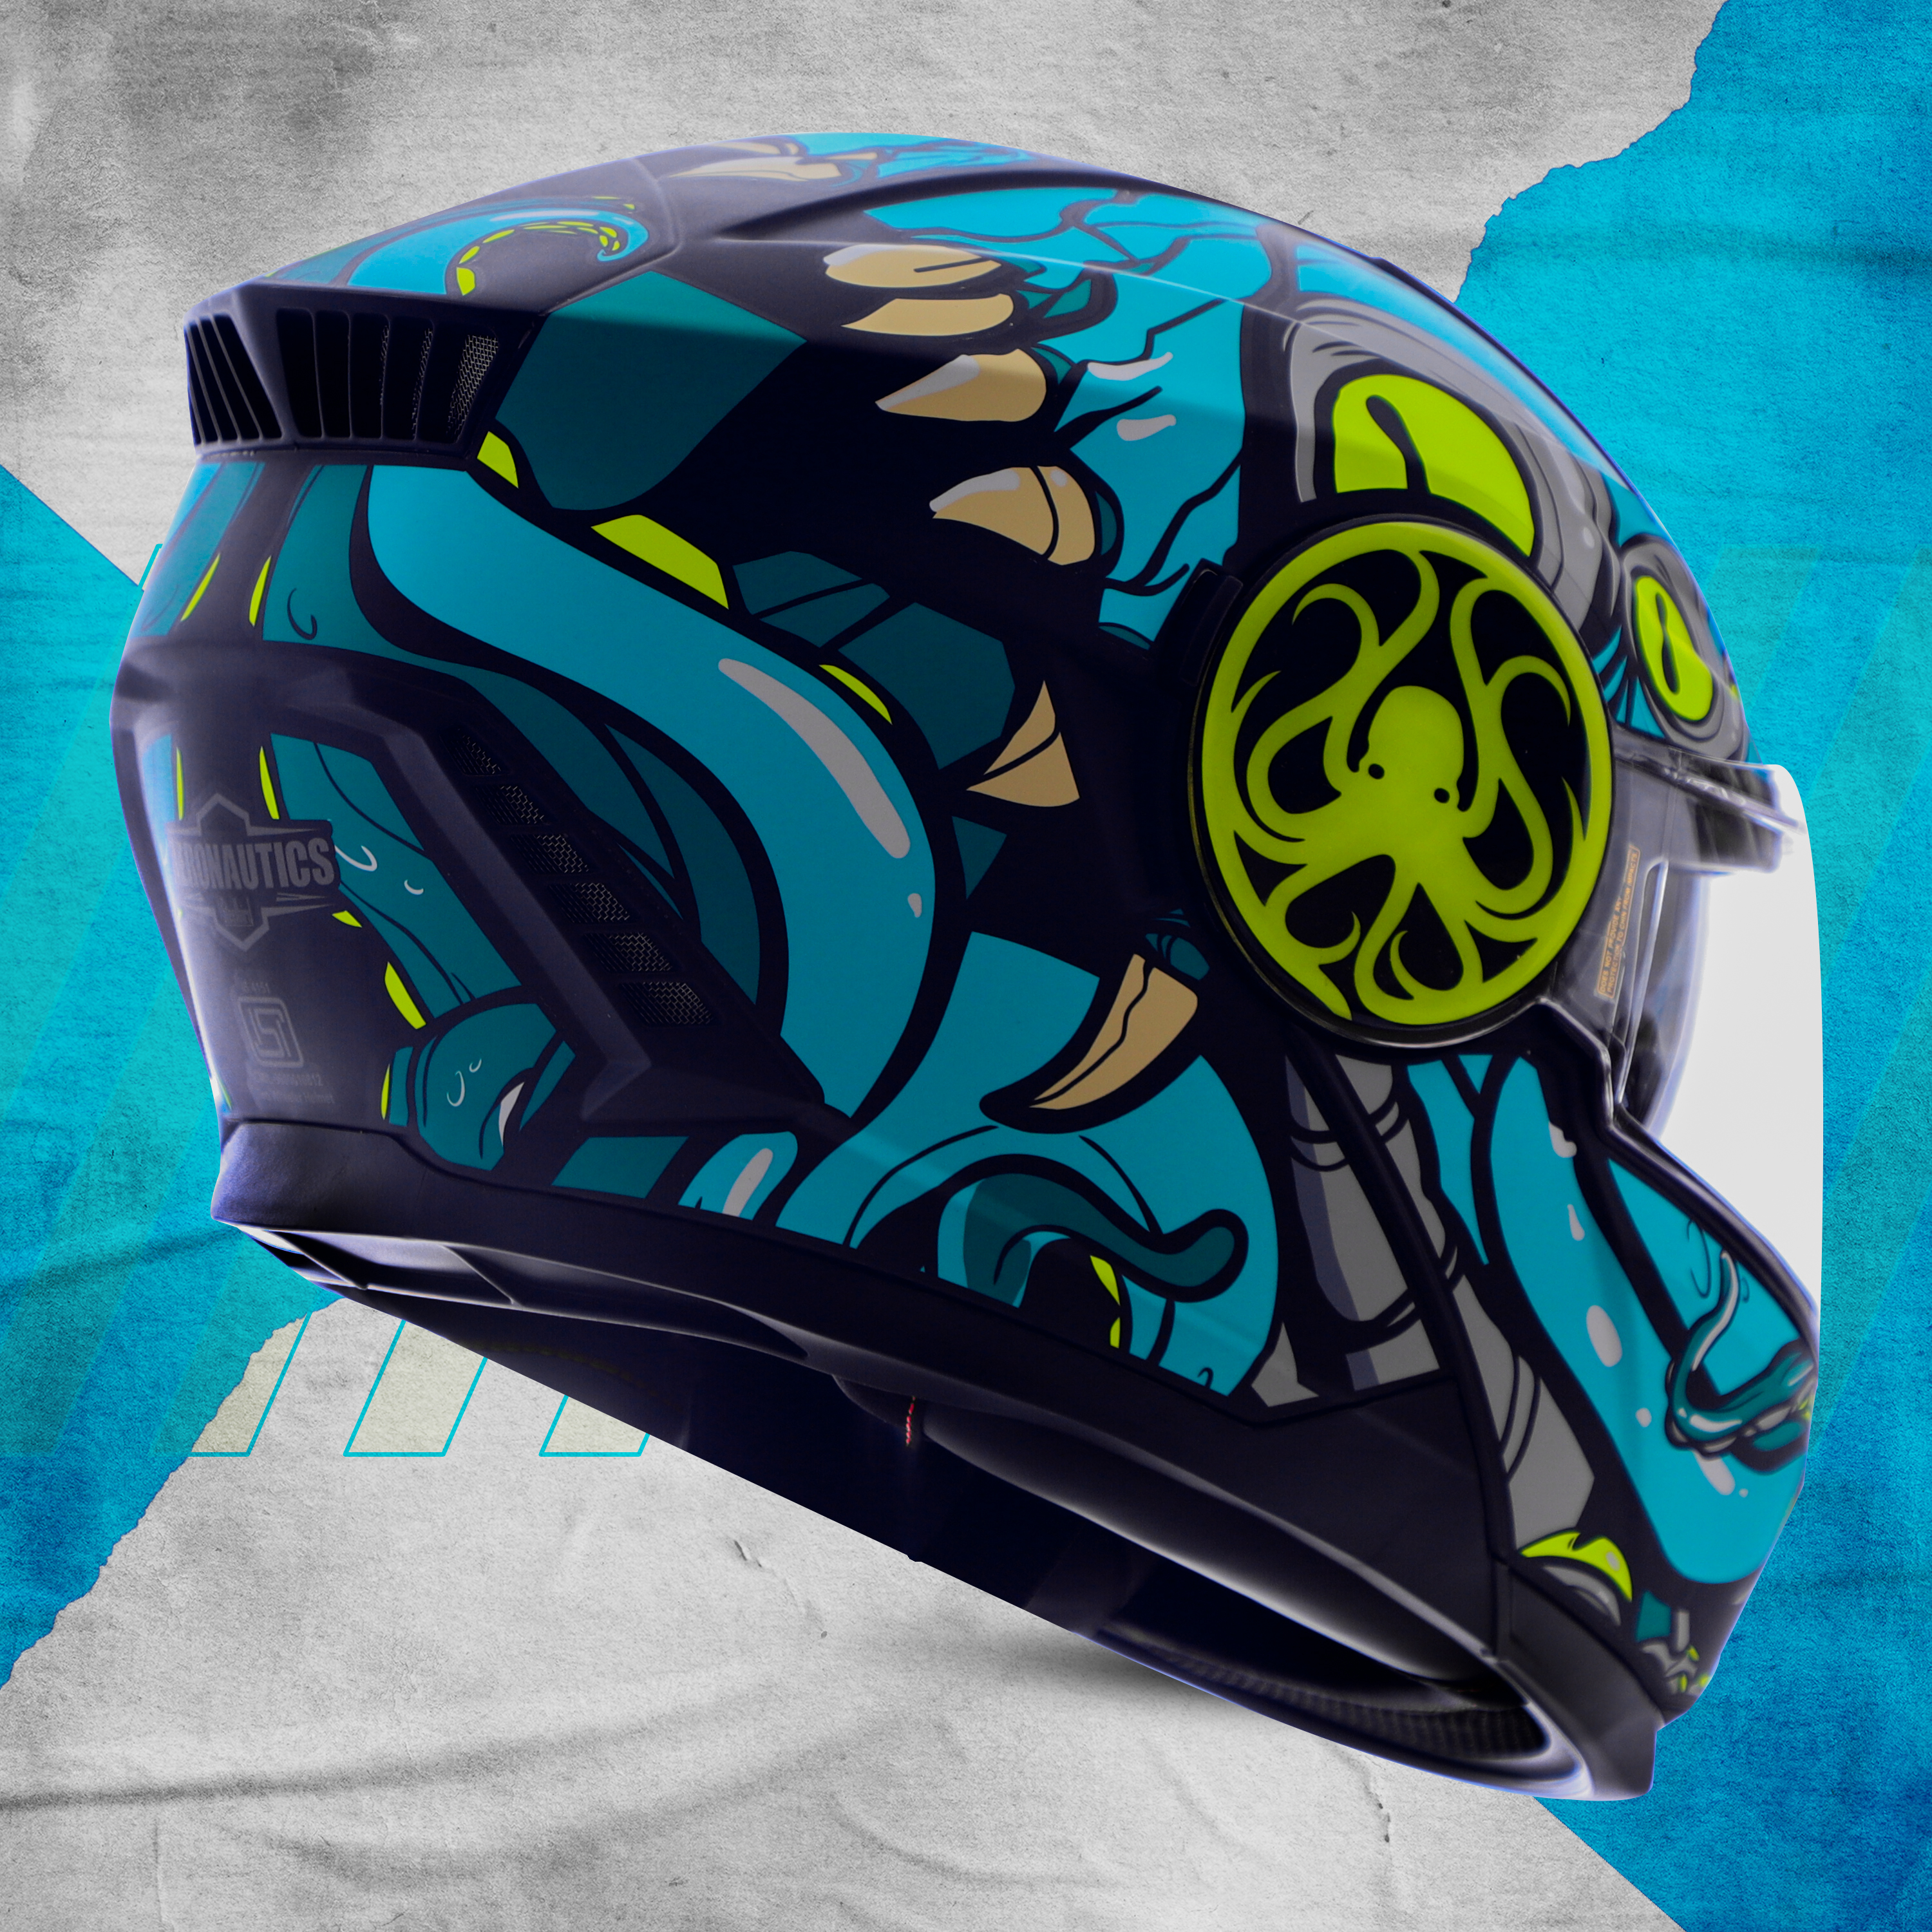 Steelbird SBH-40 Octopus ISI Certified Full Face Graphic Helmet For Men And Women With Inner Smoke Sun Shield (Glossy Black Sea Green)